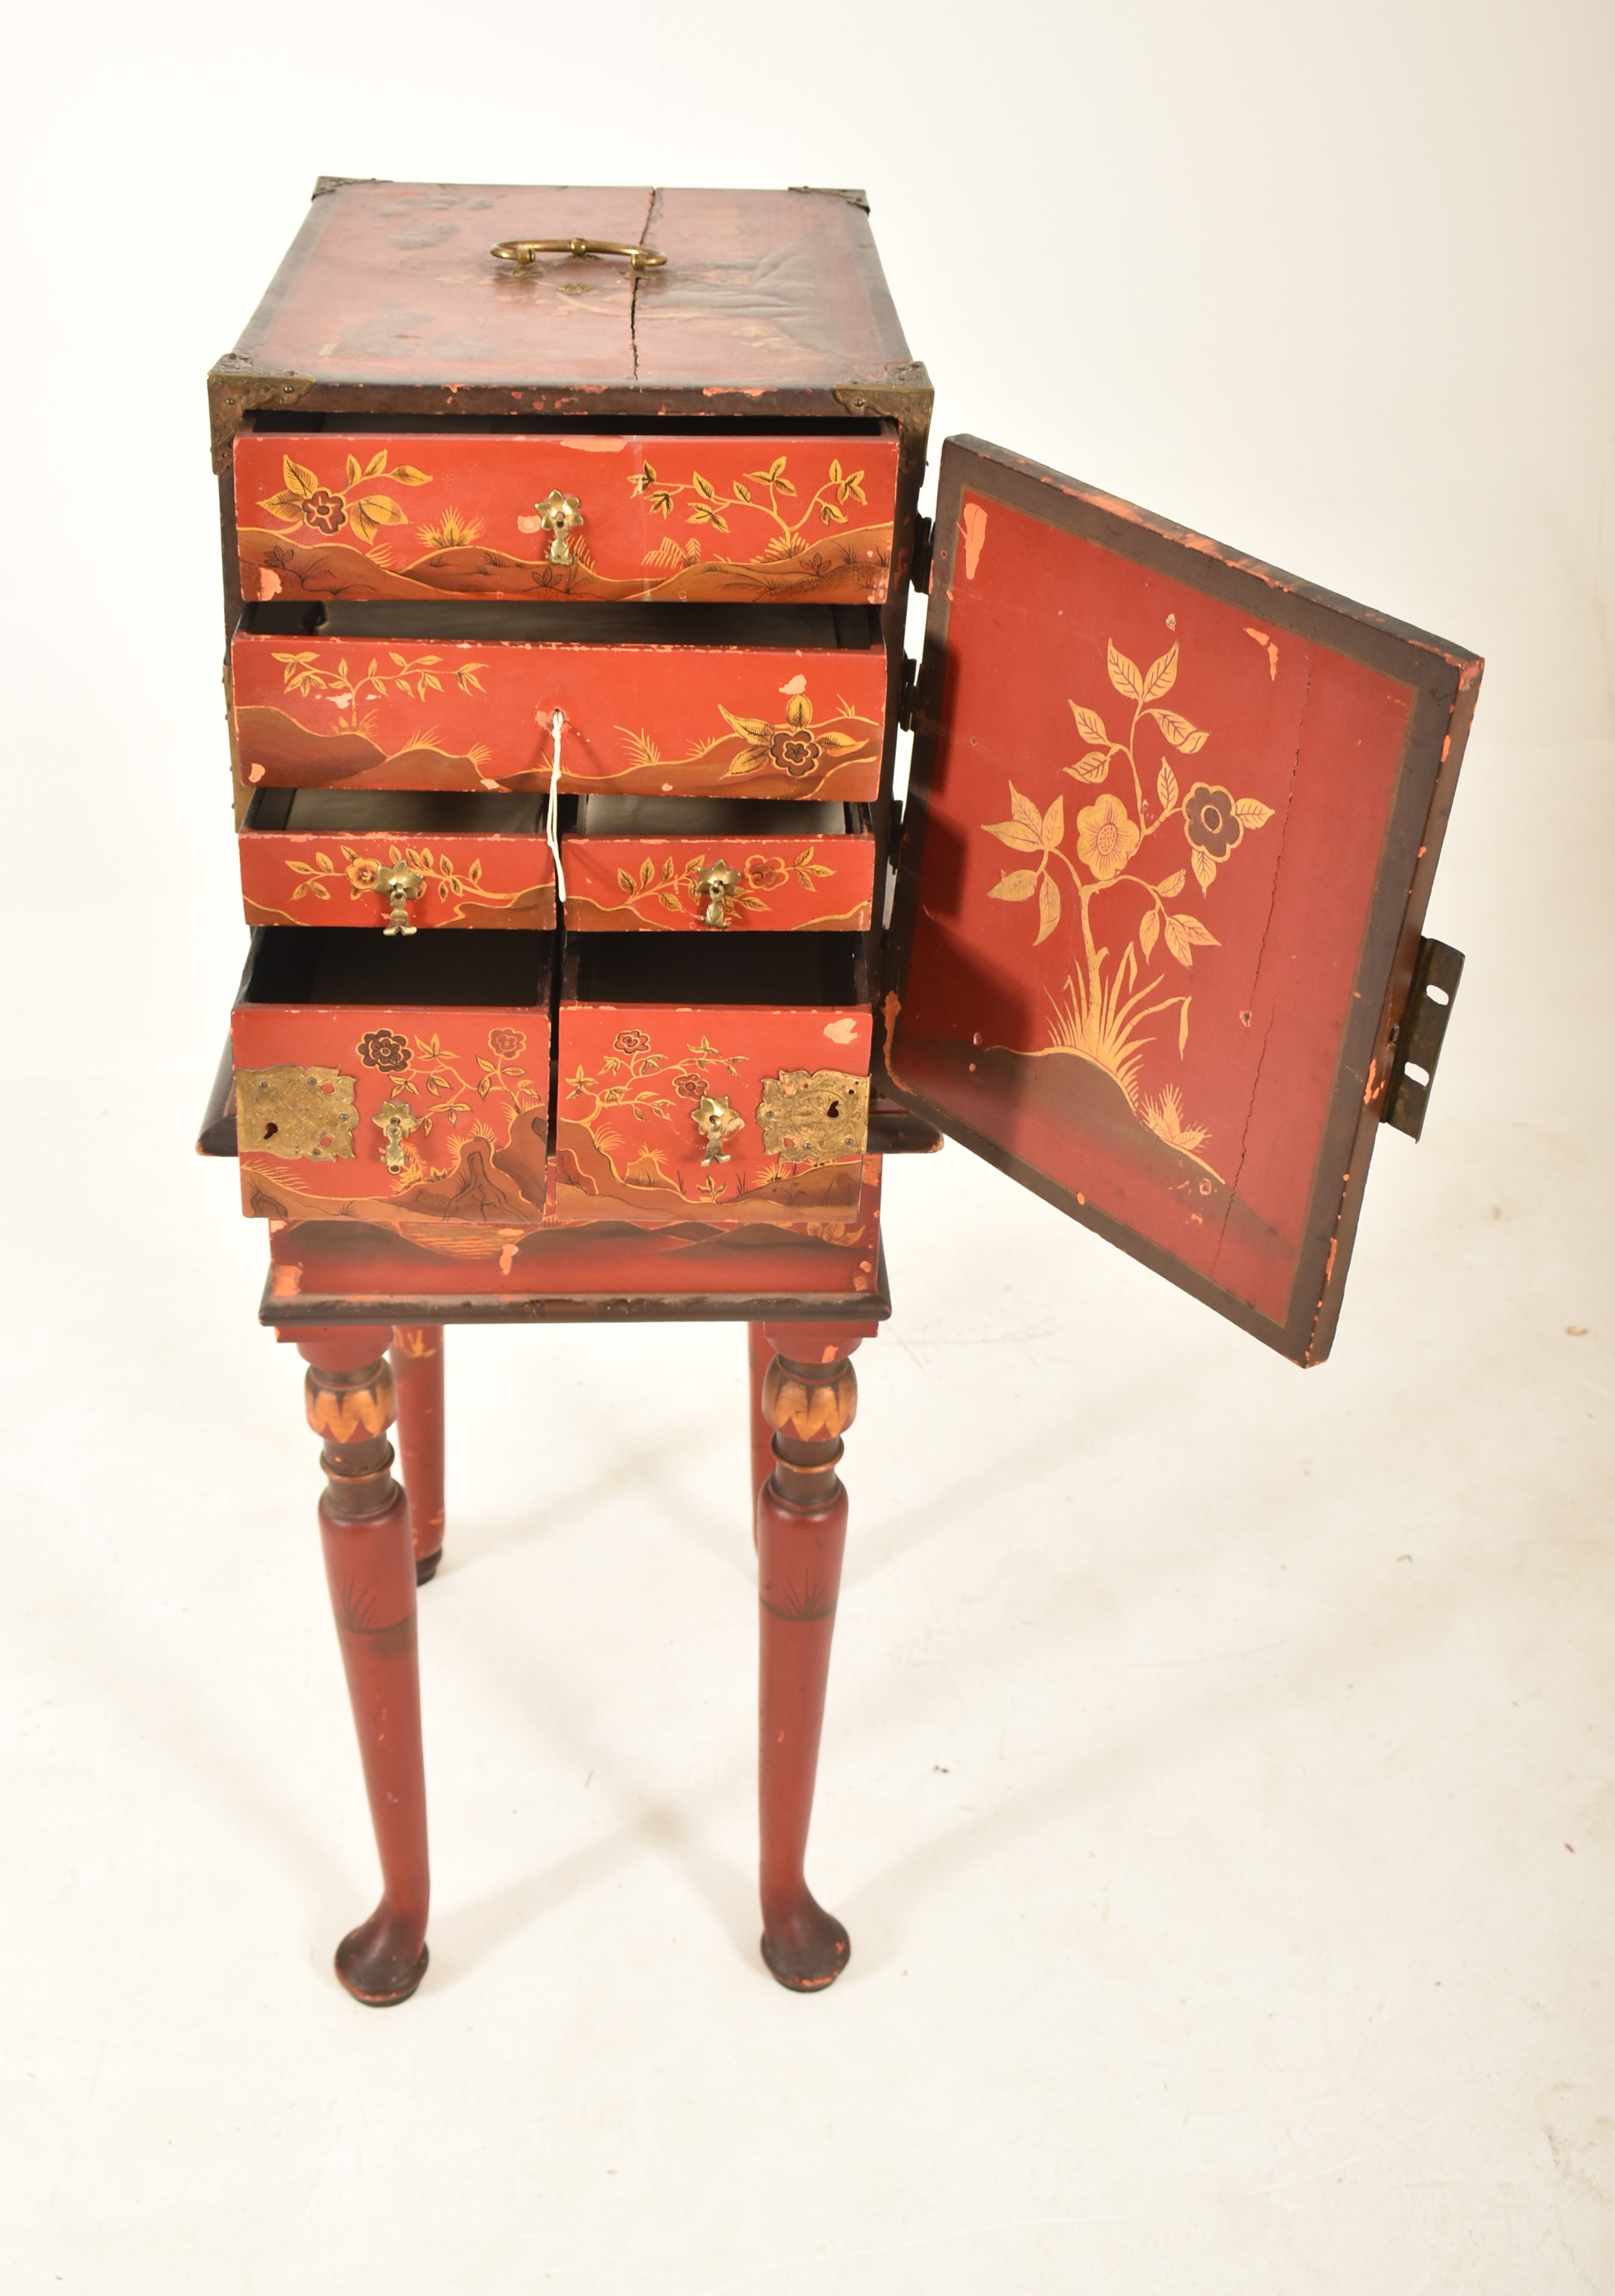 LATE 19TH CENTURY CHINESE RED LACQUERED CABINET ON STAND - Image 3 of 6